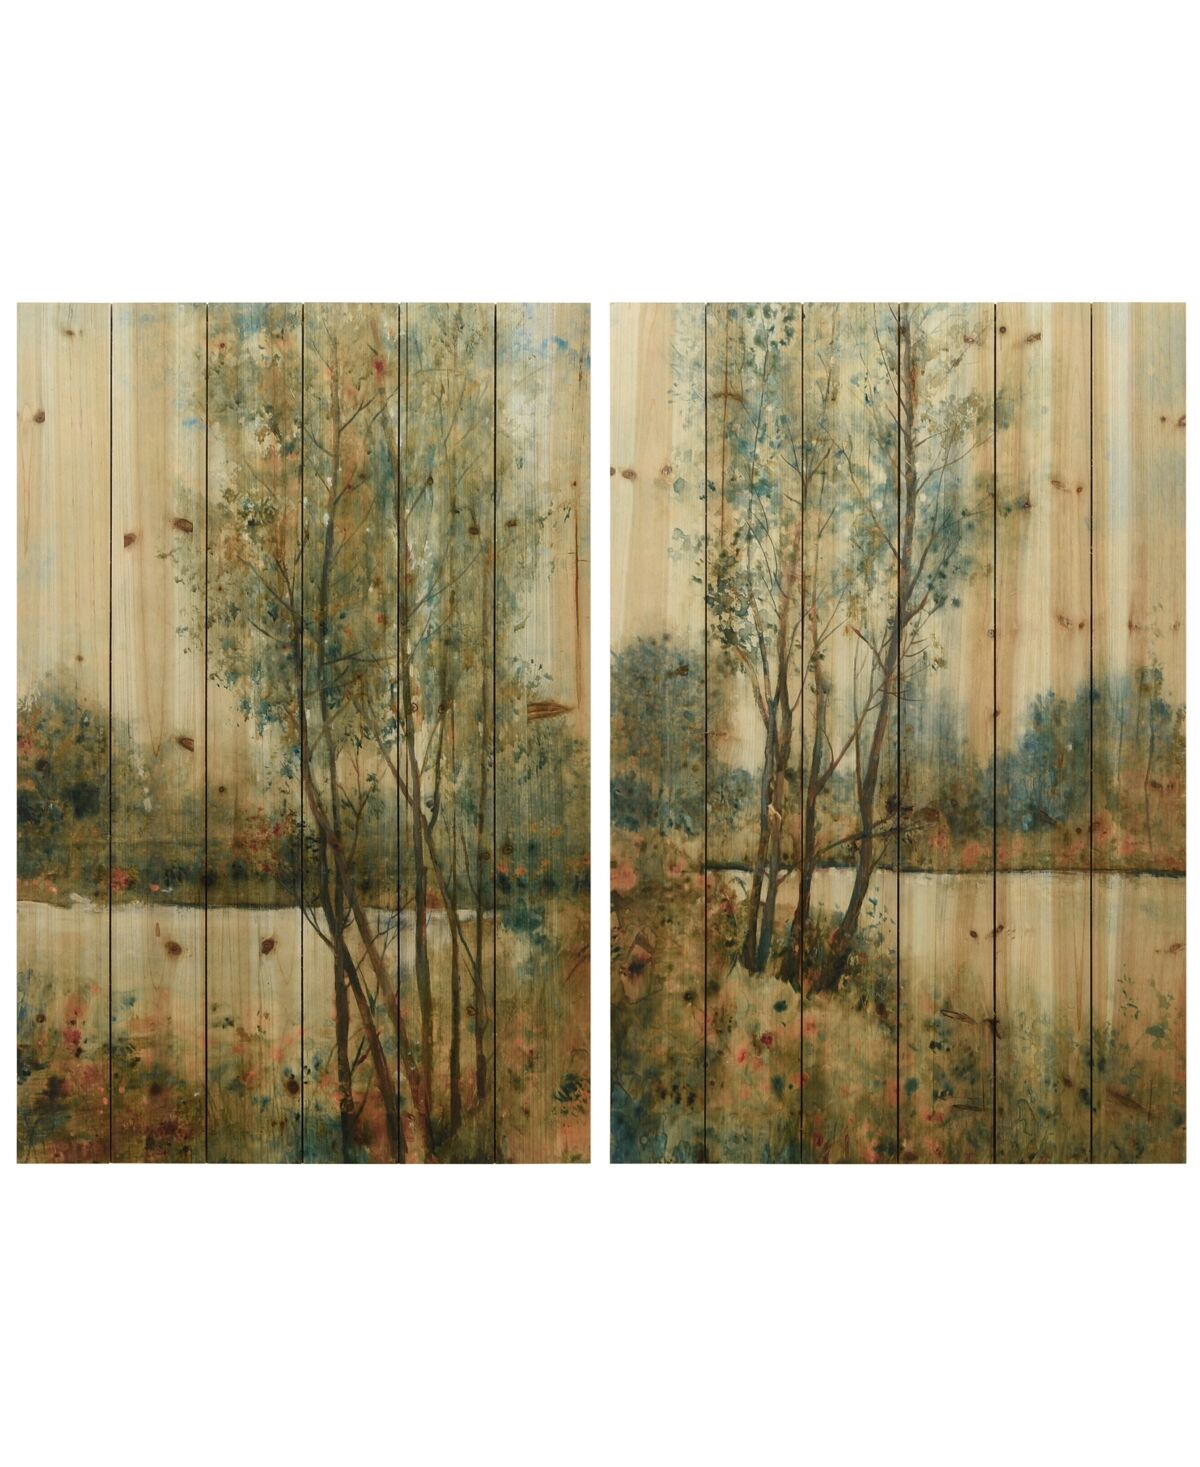 Empire Art Direct Early Spring 1 and 2 Arte de Legno Digital Print on Solid Wood Wall Art, 36